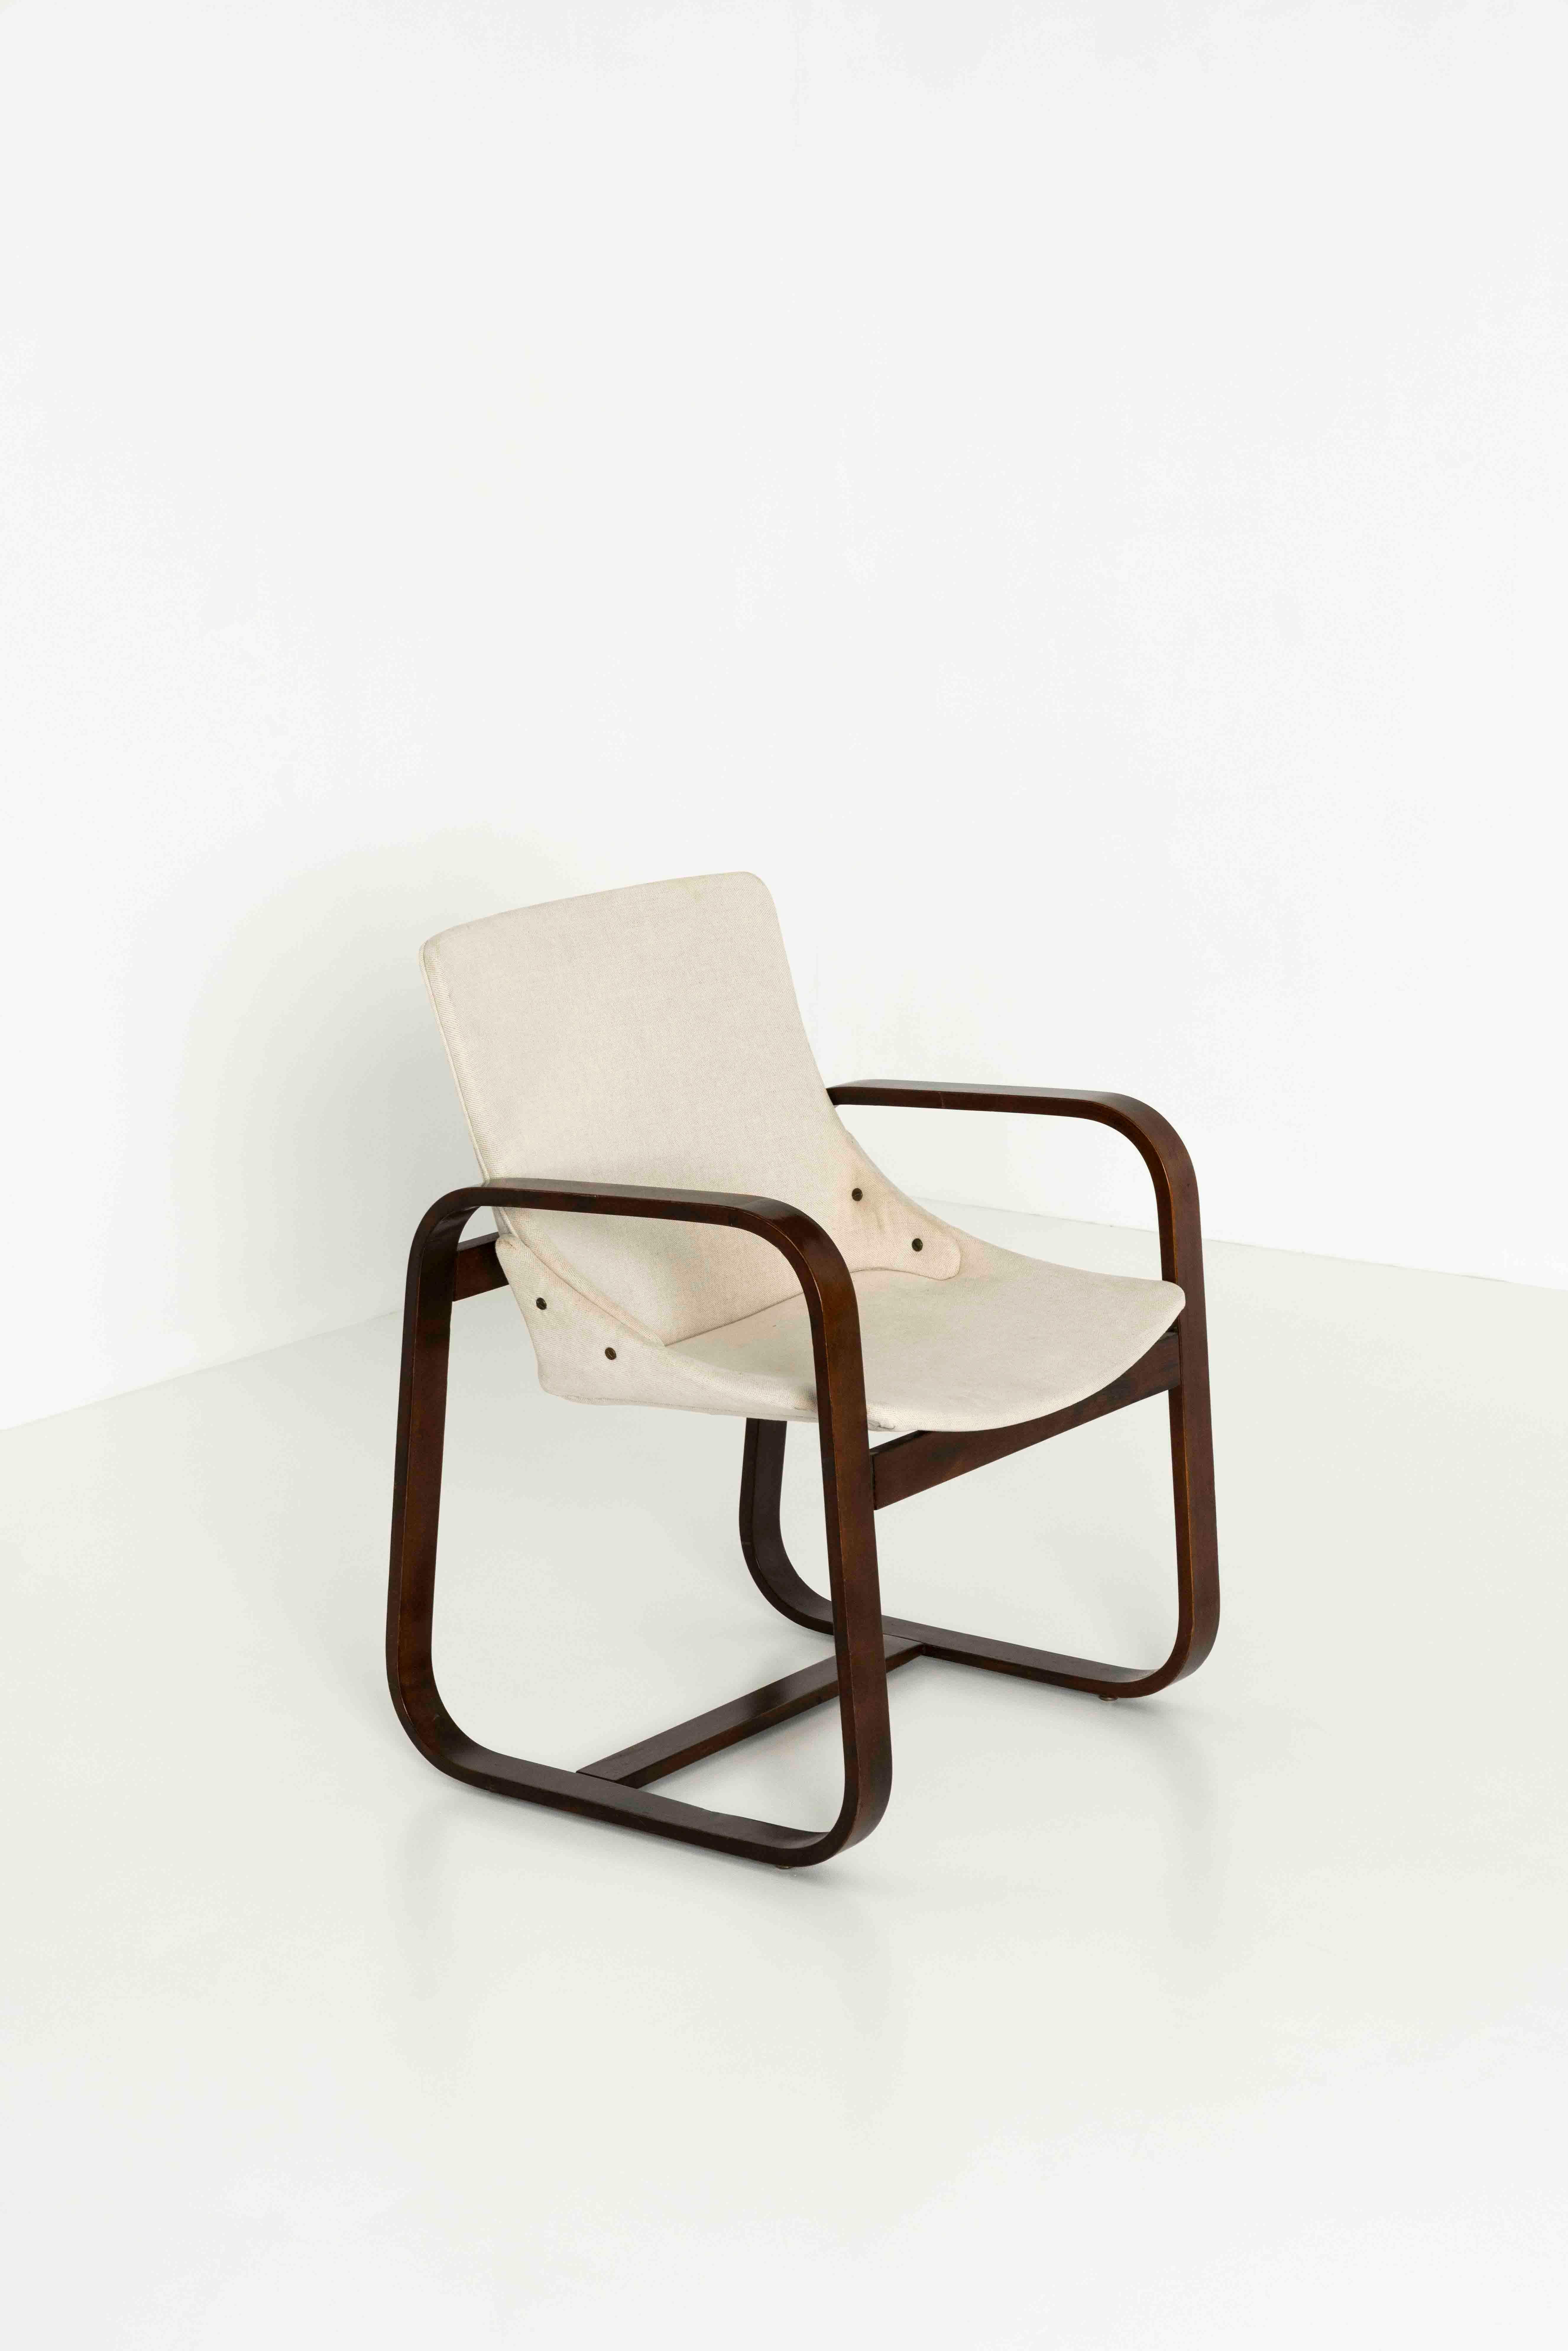 Mid-Century Modern Arm Chair by Giuseppe Pagano Pogatschnig and Gino Maggioni, Italy 1940s For Sale